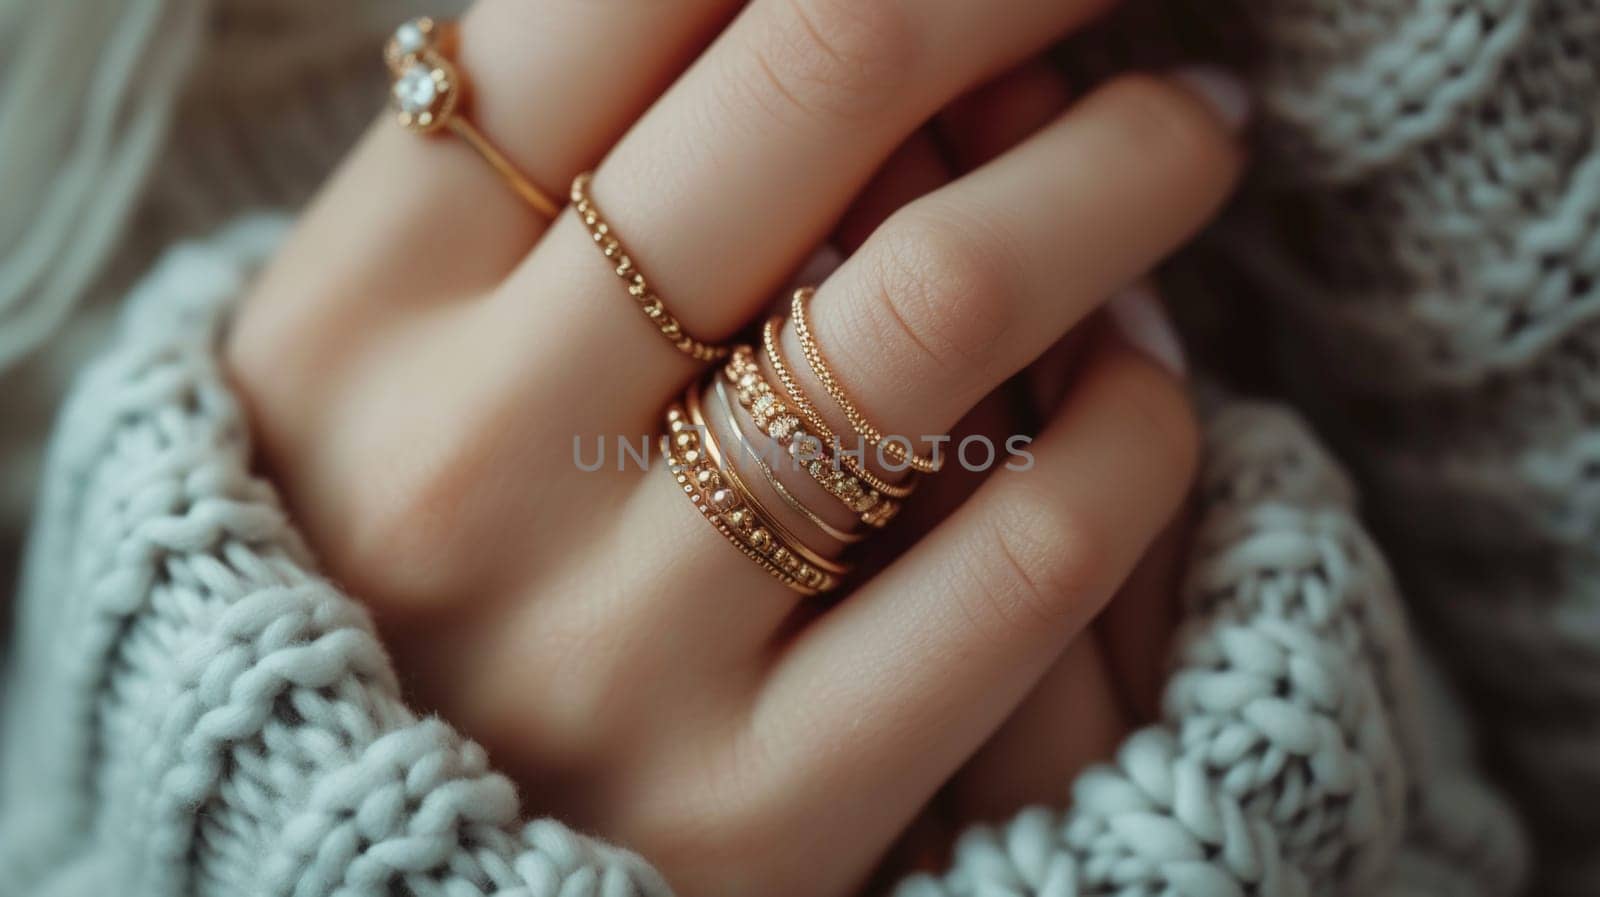 A woman's hands are wearing several rings on them